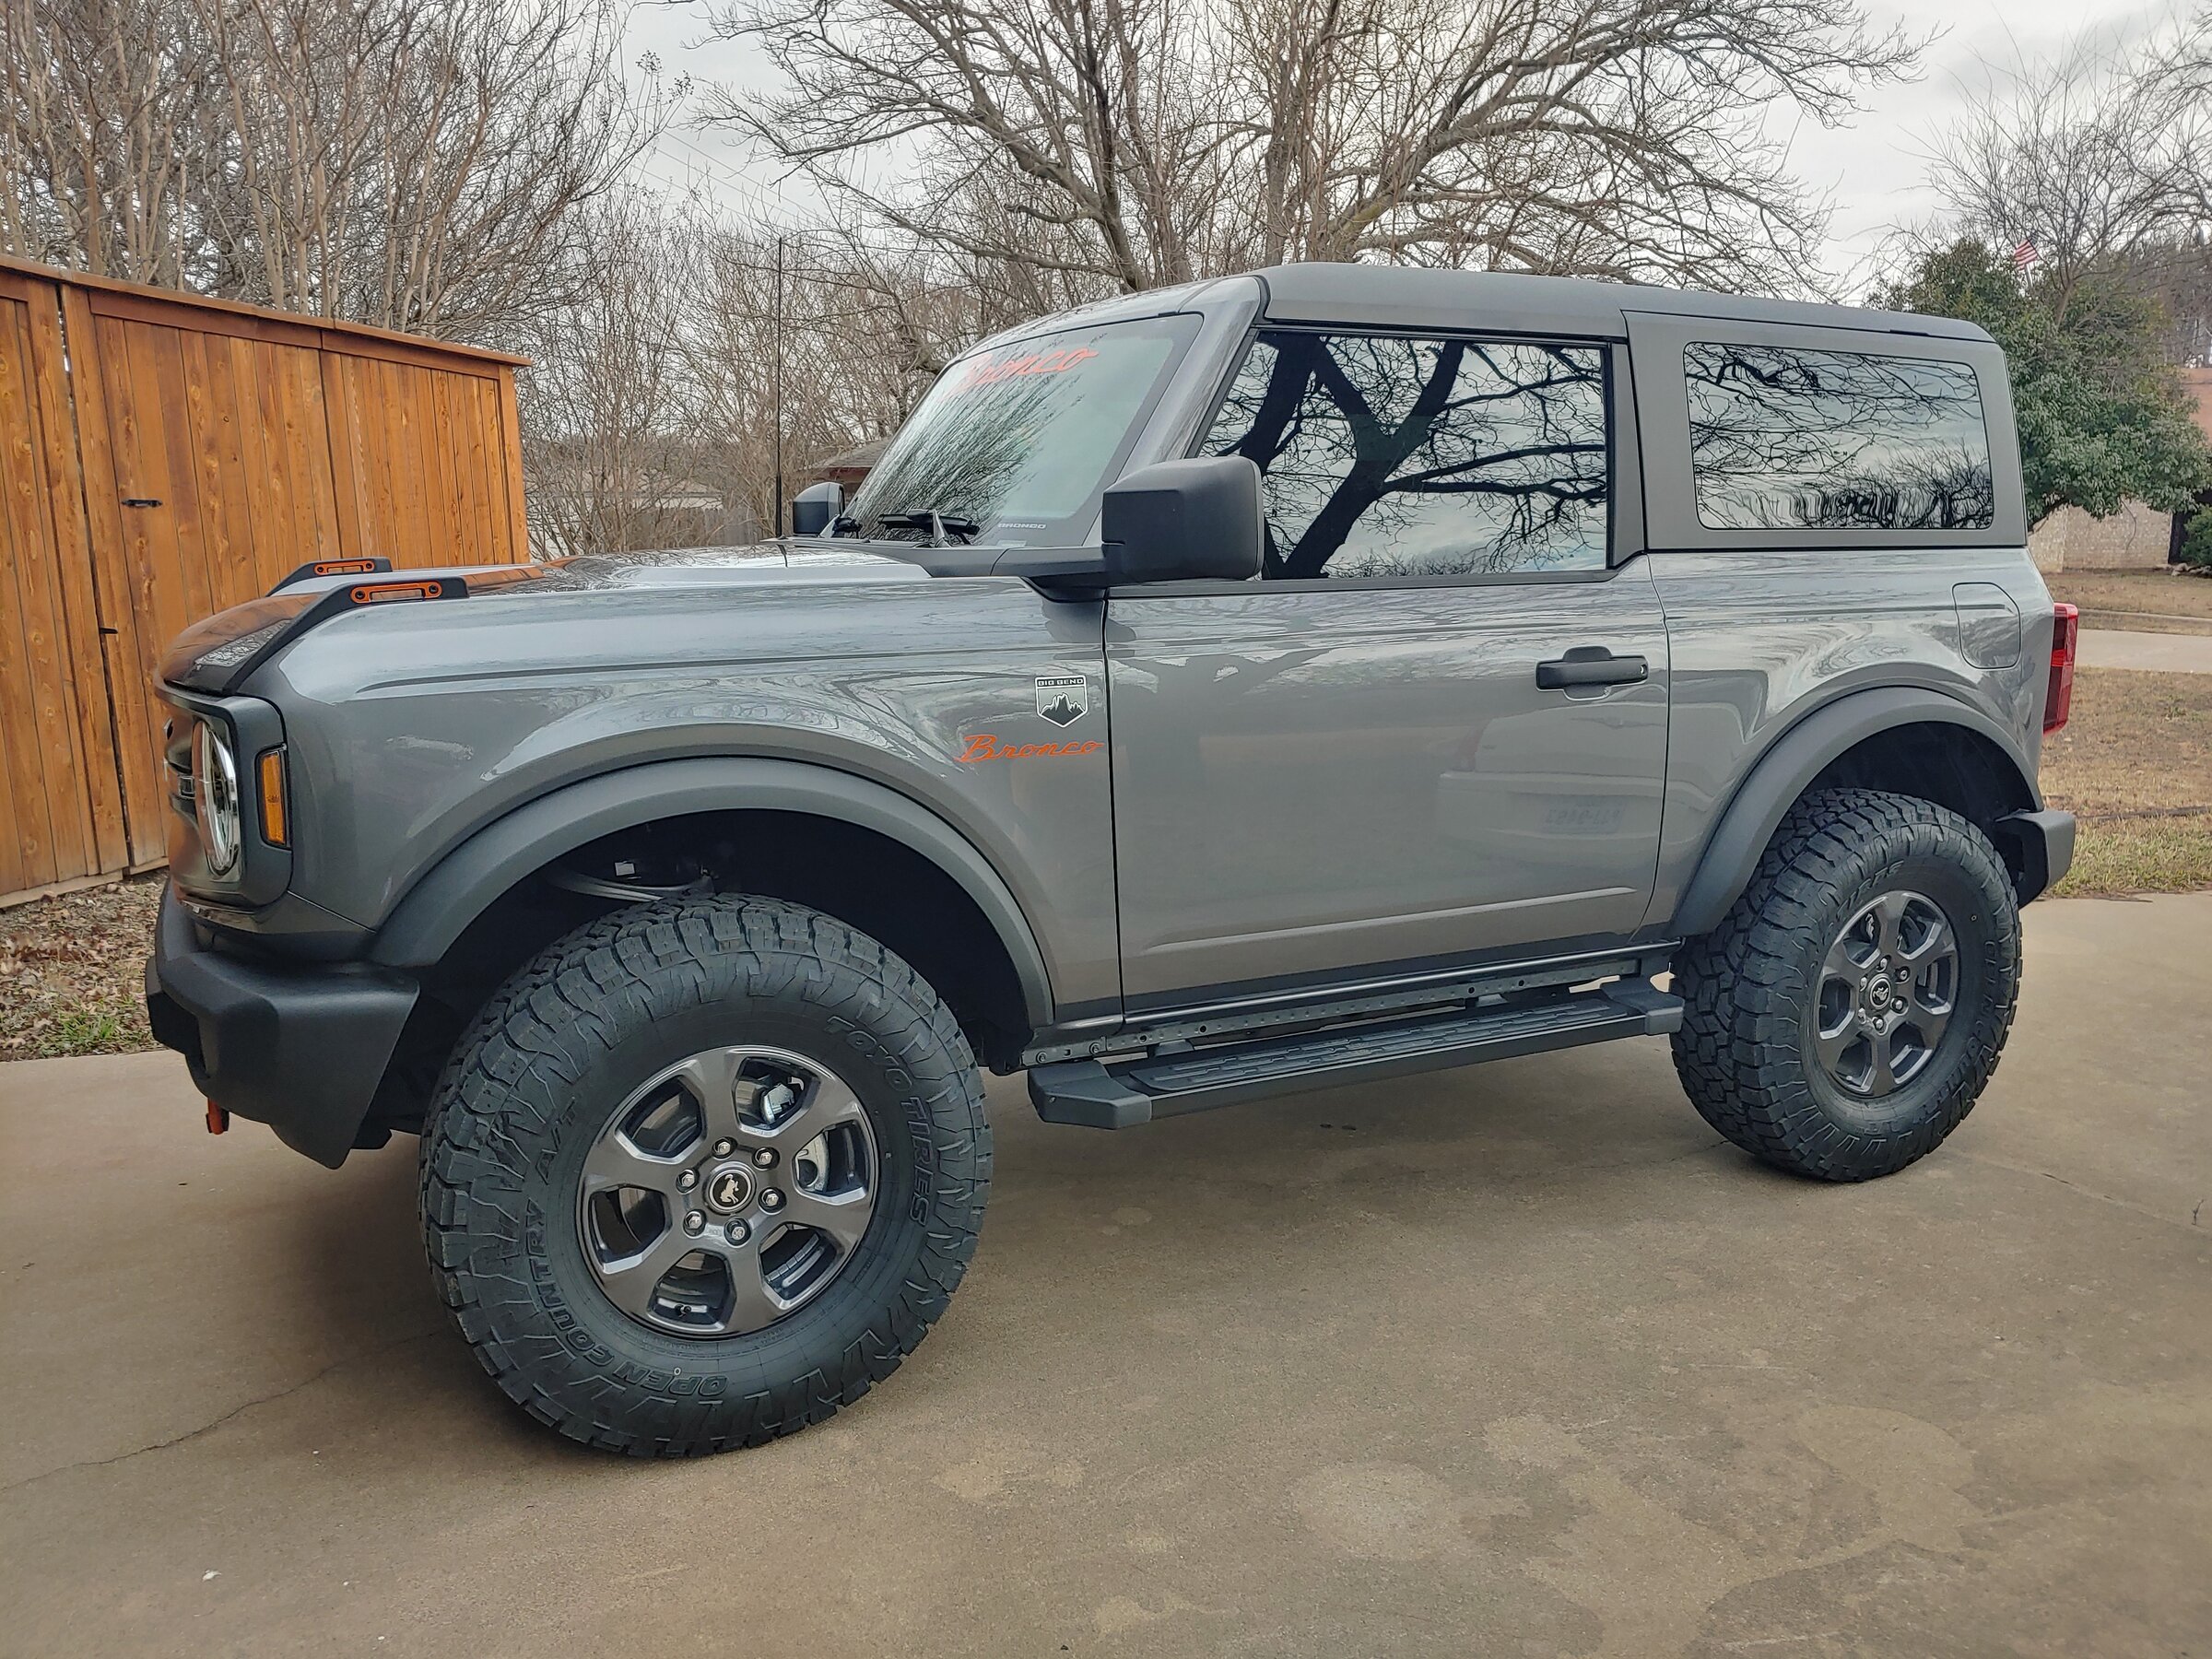 Ford Bronco 2 inch lift and 35s before and after pics 20220115_134110_HDR